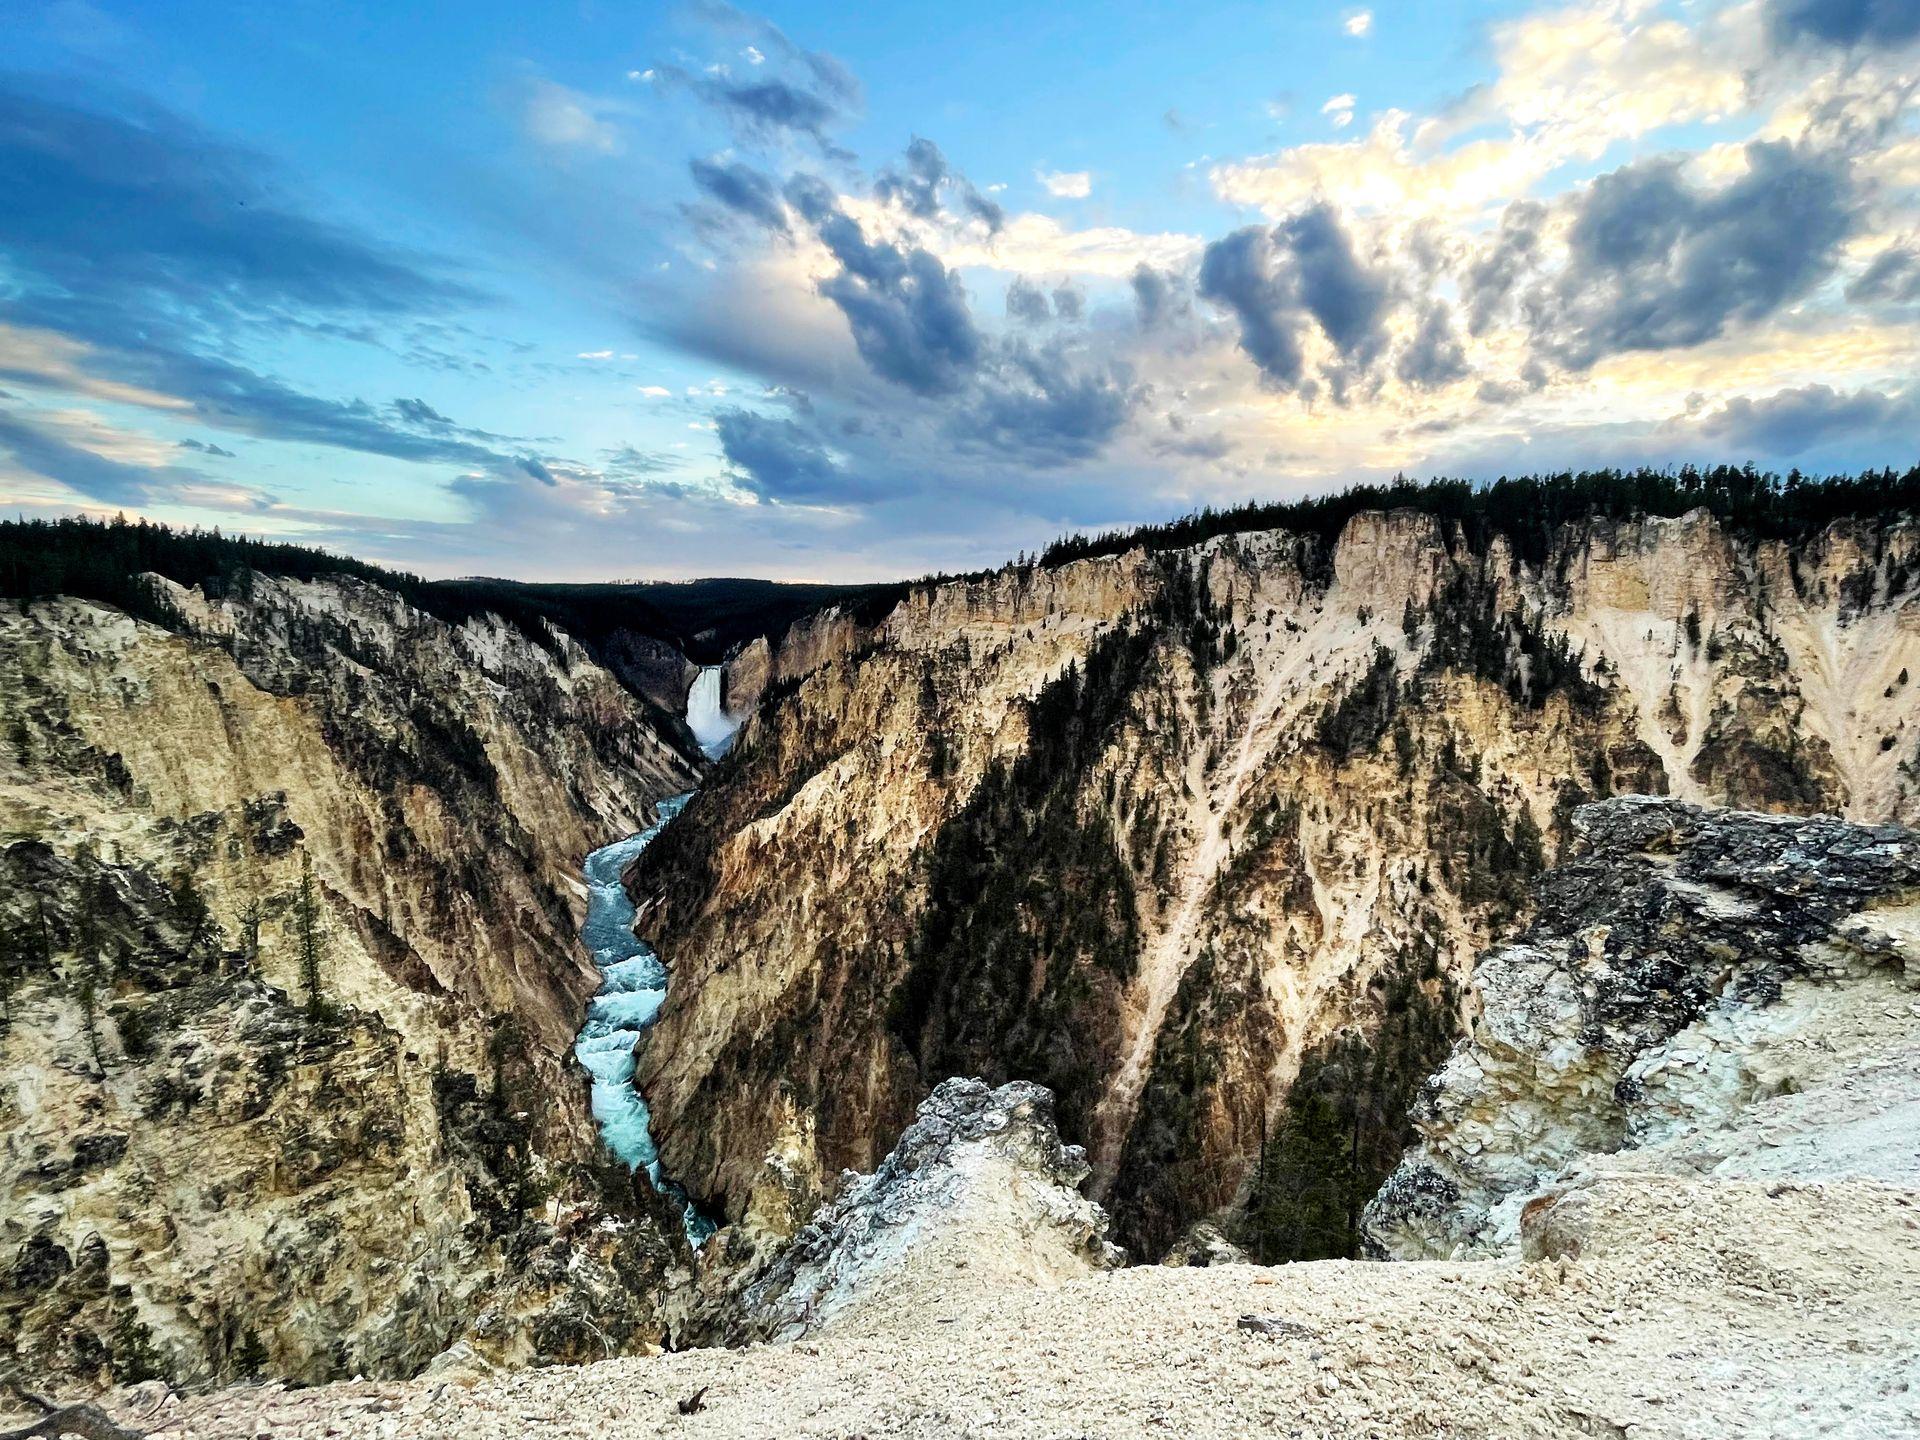 A view of the Grand Canyon of the Yellowstone around sunset.